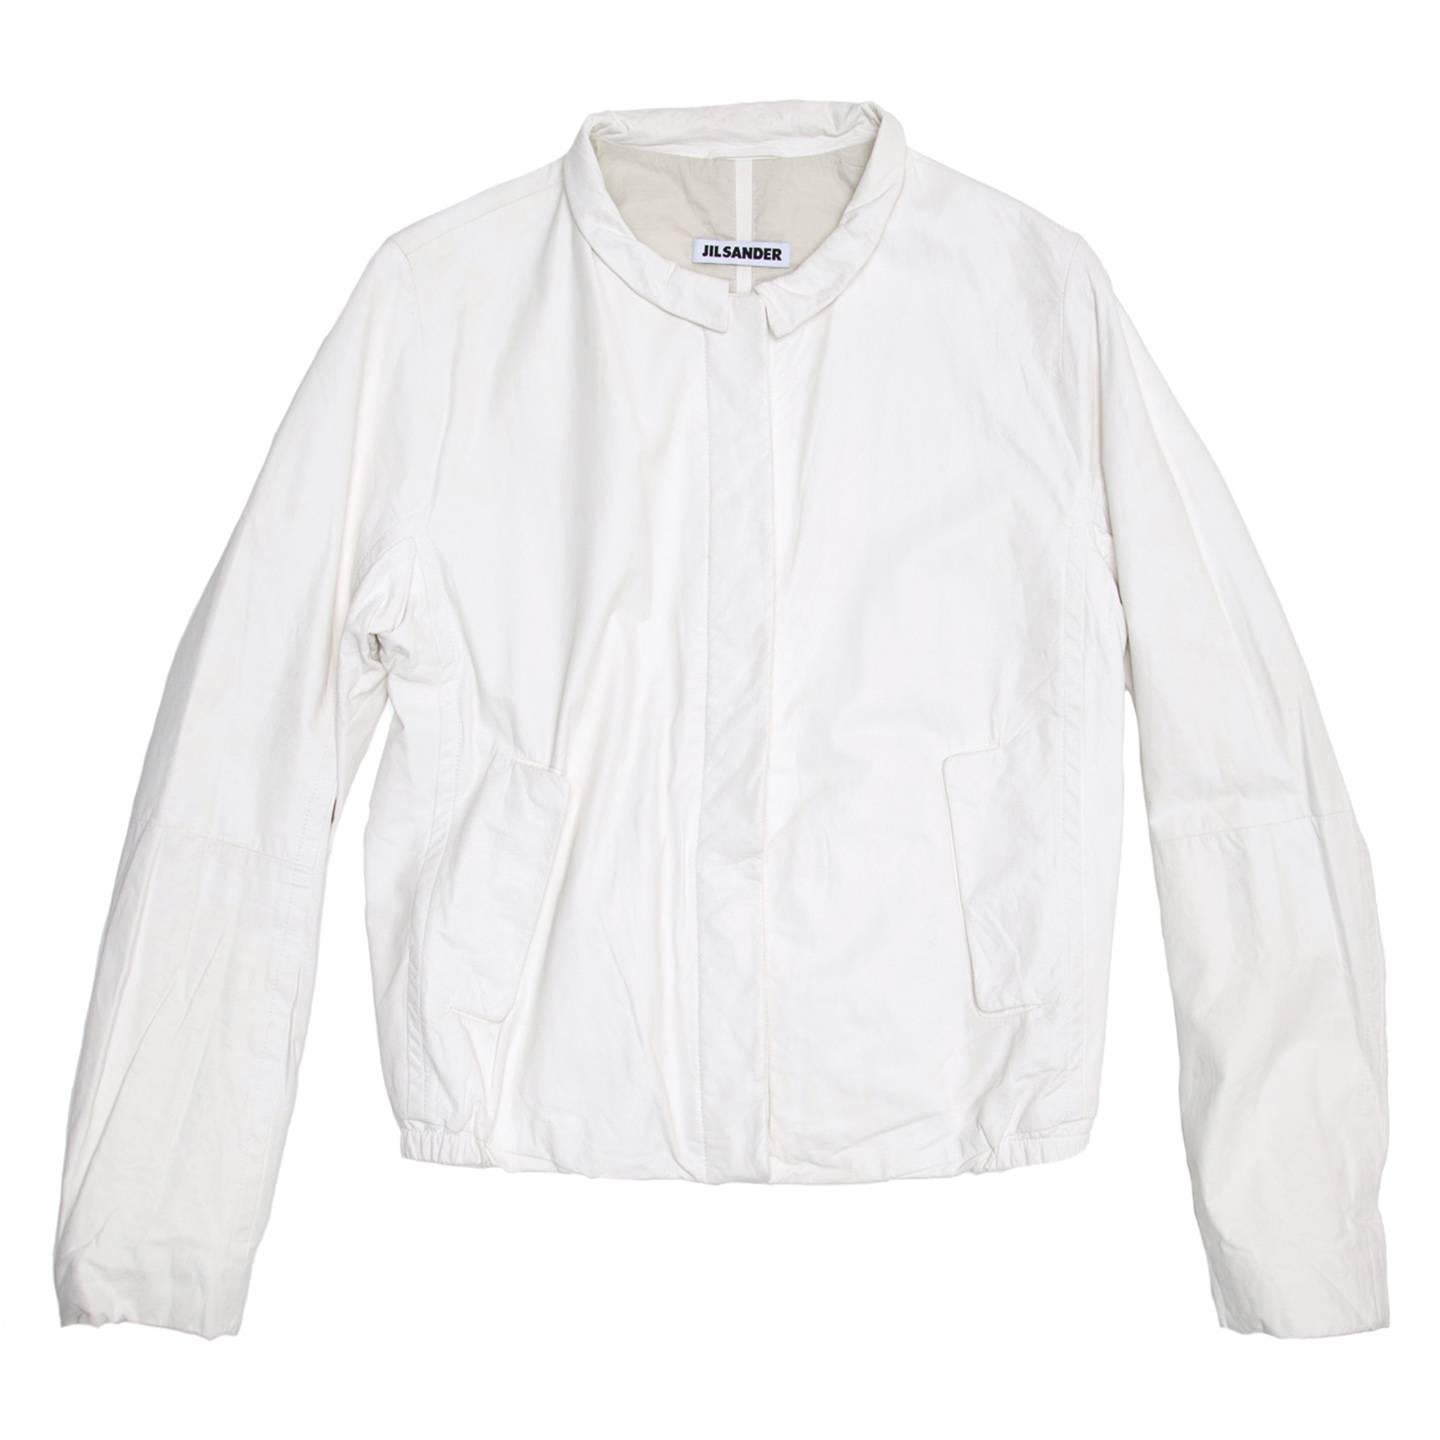 Beautiful soft white leather bomber style jacket with a small peter pan collar. The front fastens with caramel color buttons concealed under a leather flap. The side pockets also fasten with matching buttons concealed under flaps.

Size  40 French